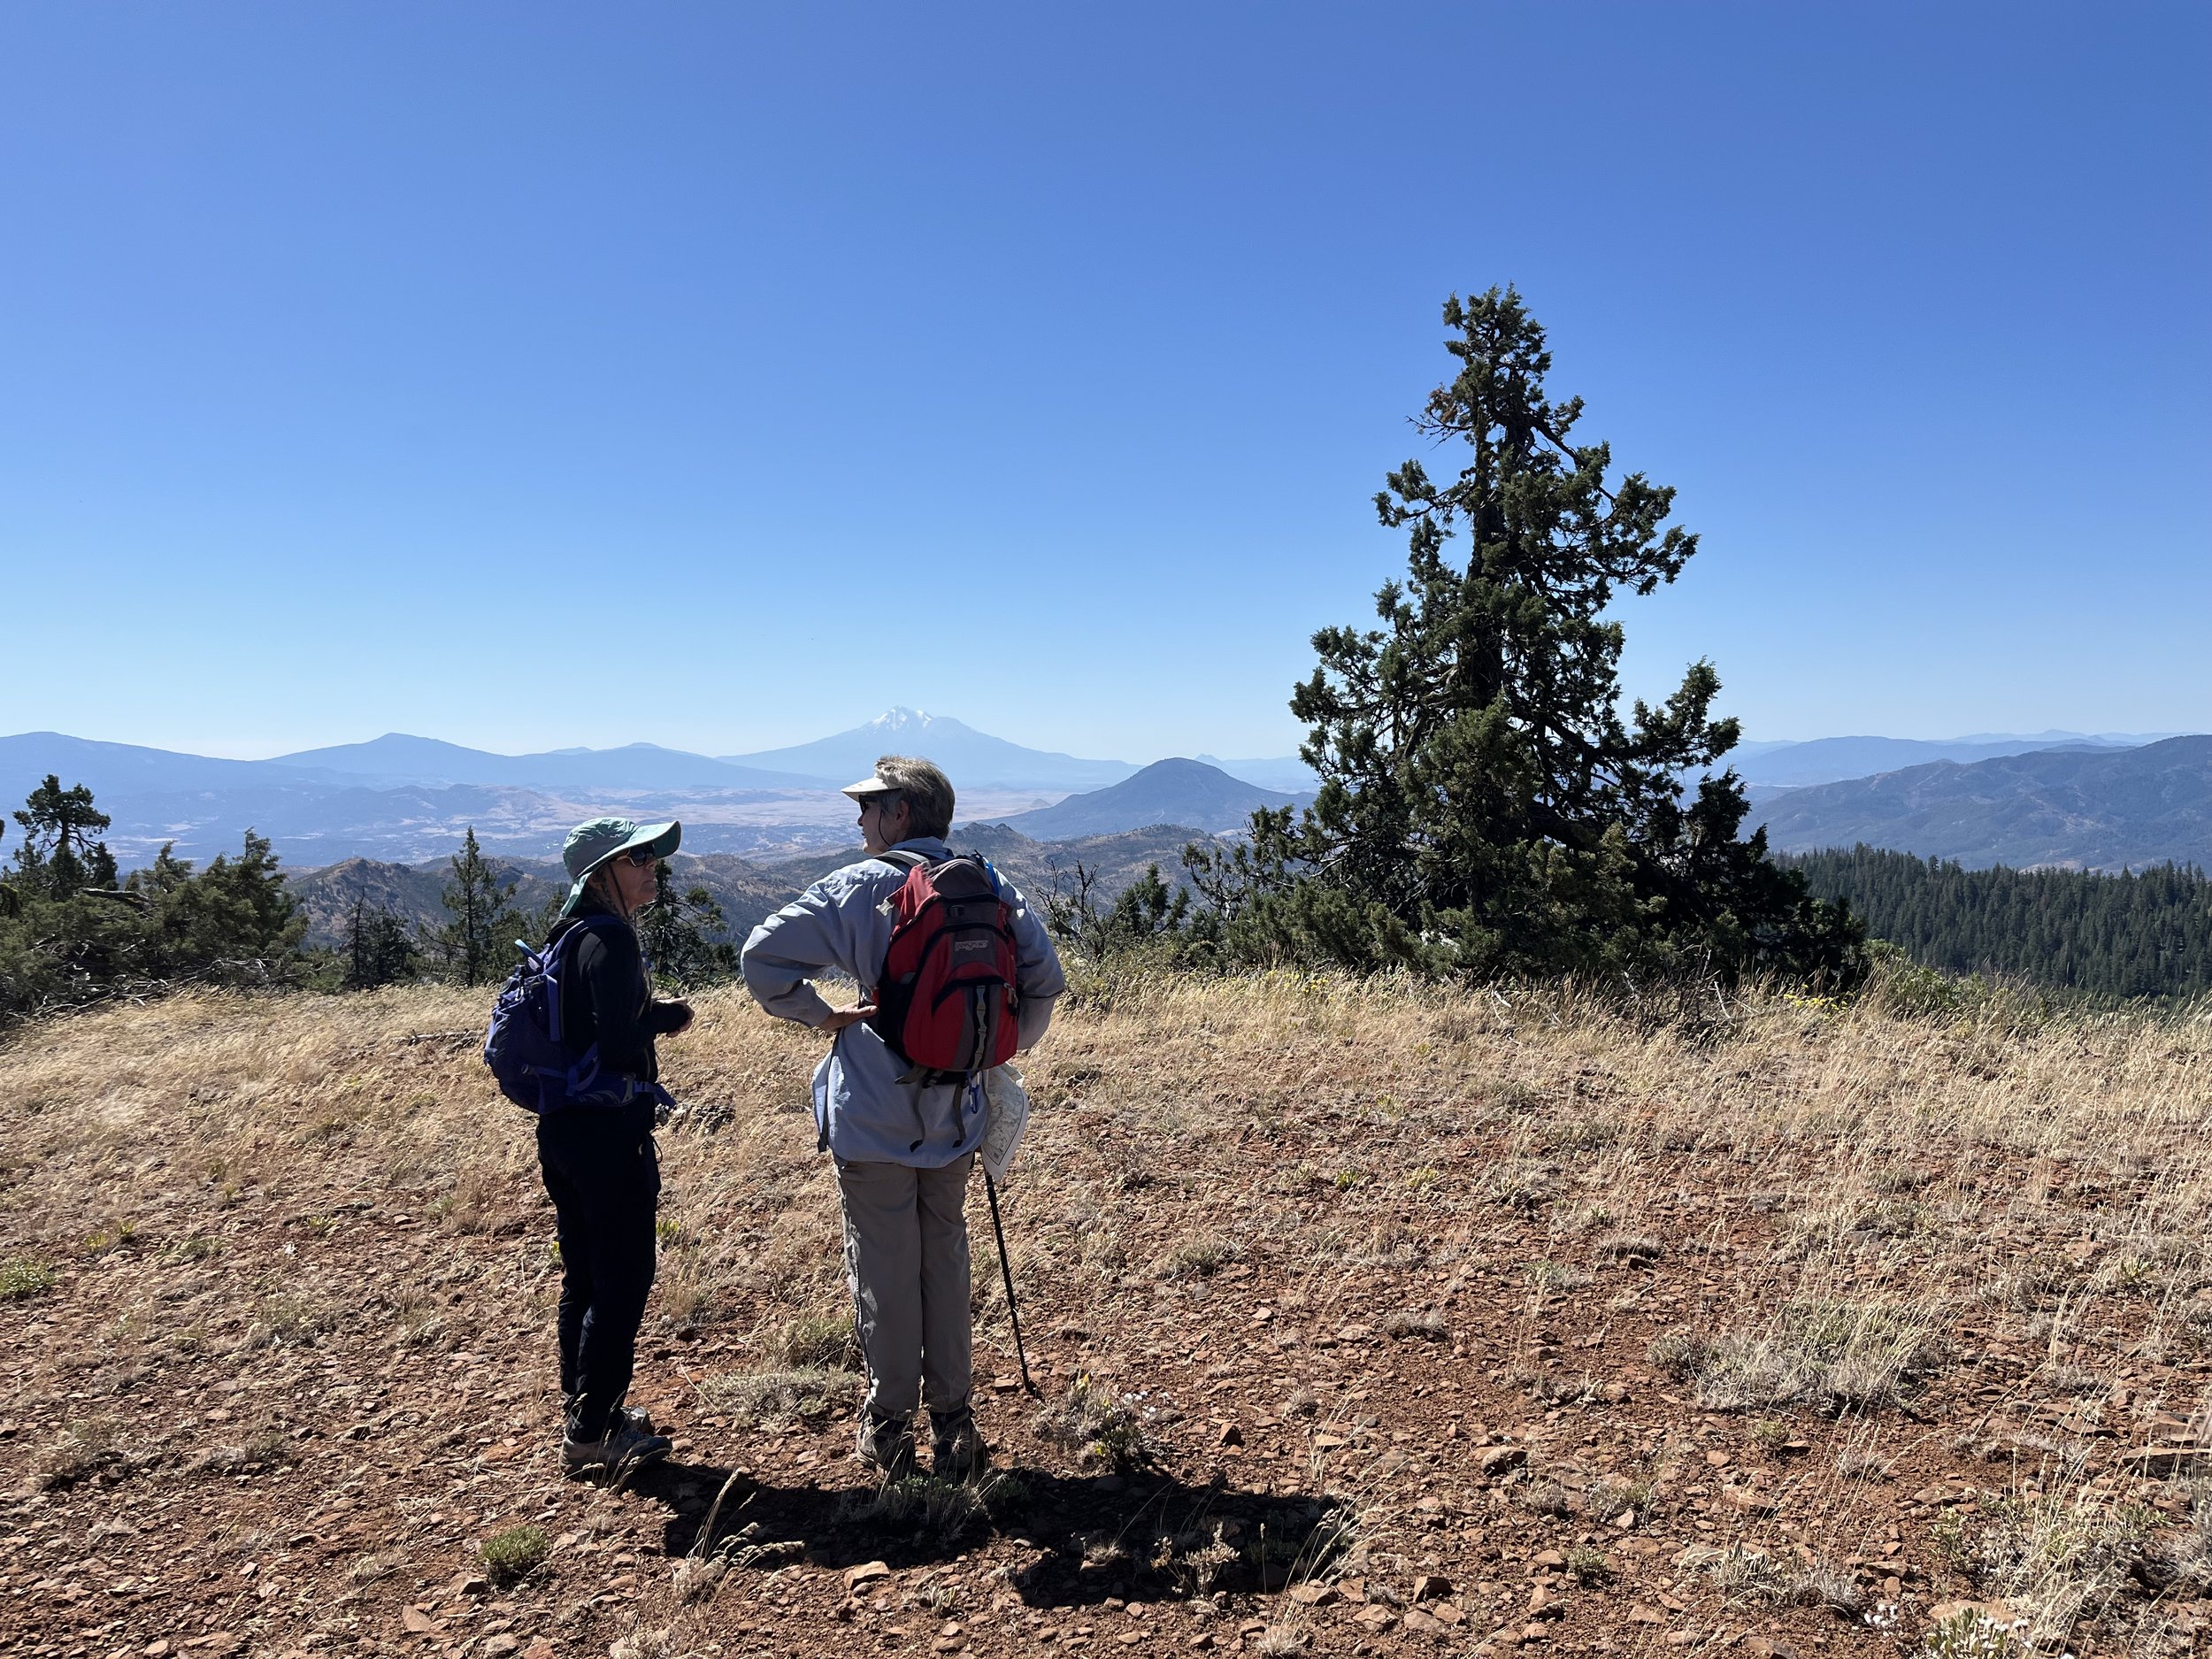  Taking in views of Mount Shasta and beyond 